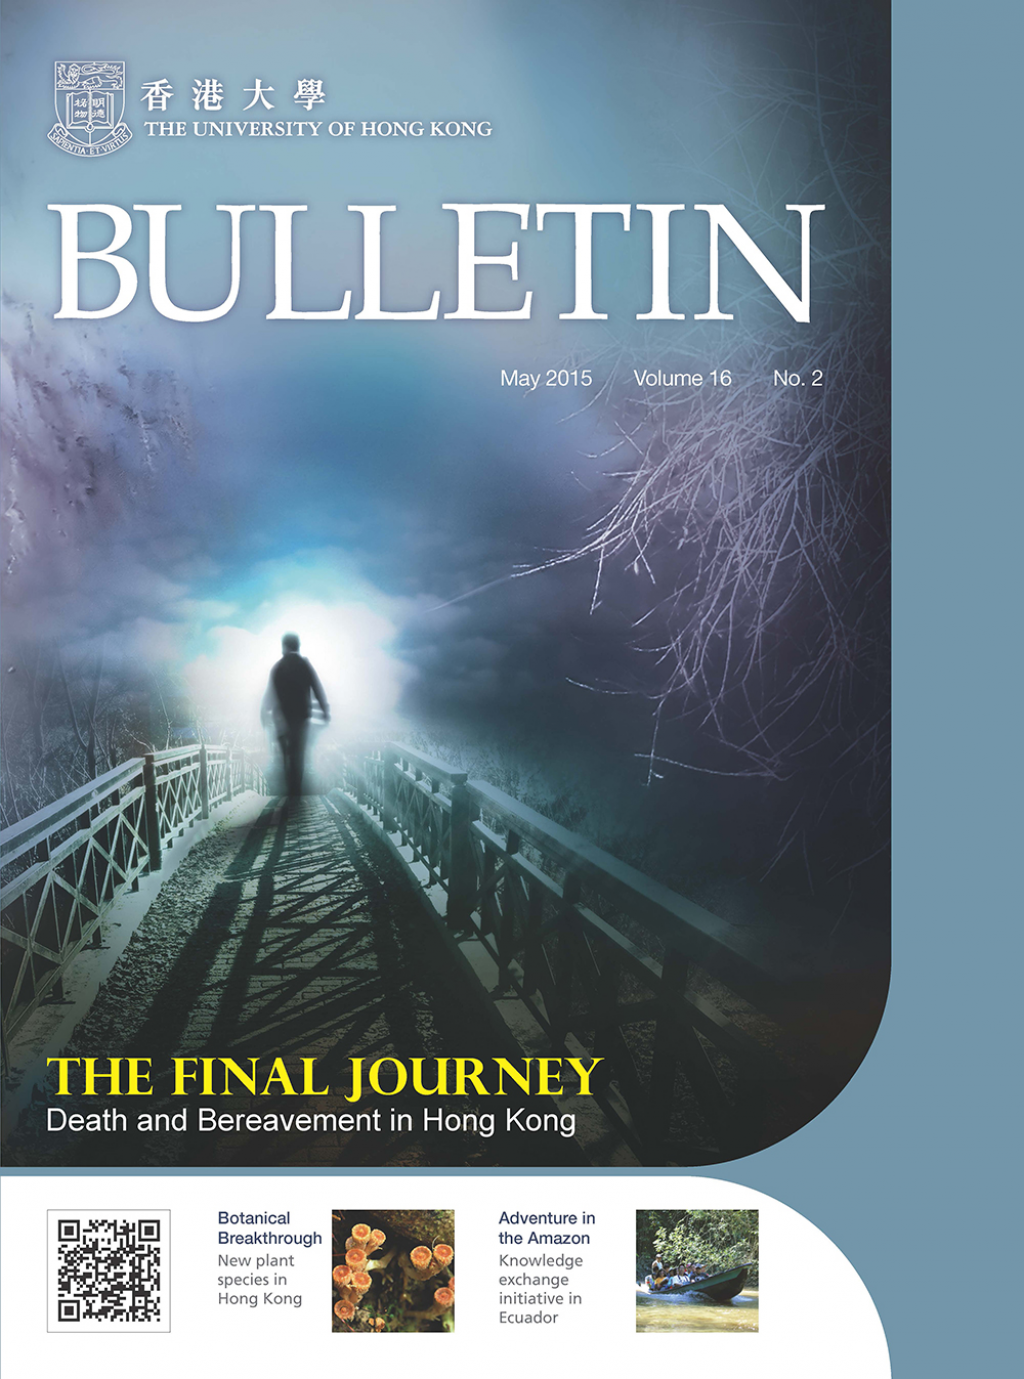 Bulletin May 2015 issue is out